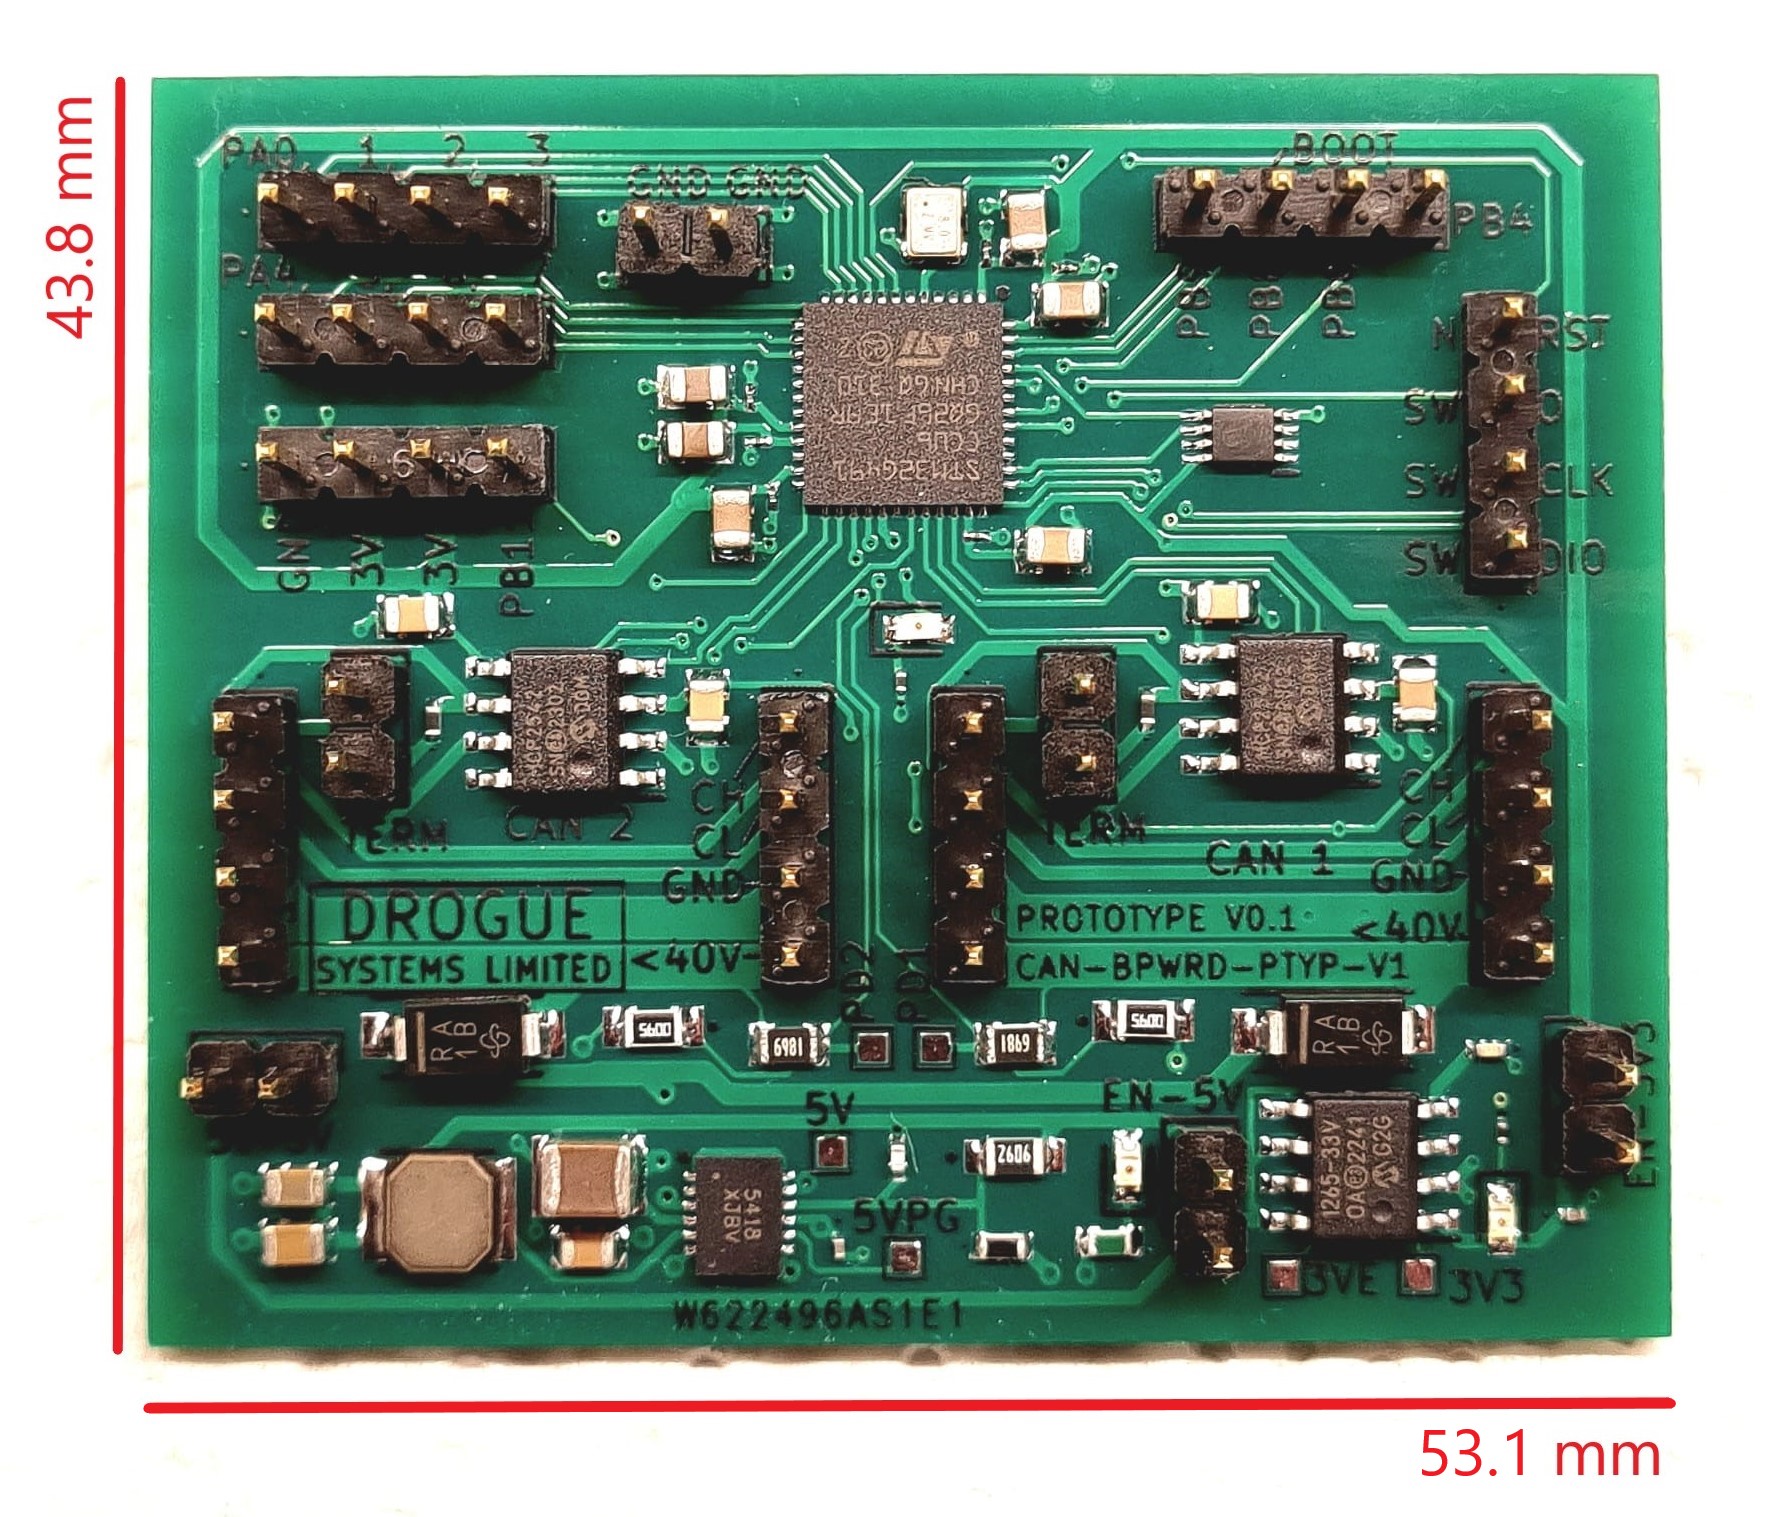 CAN-BPWRD Development Board with annotated dimensions